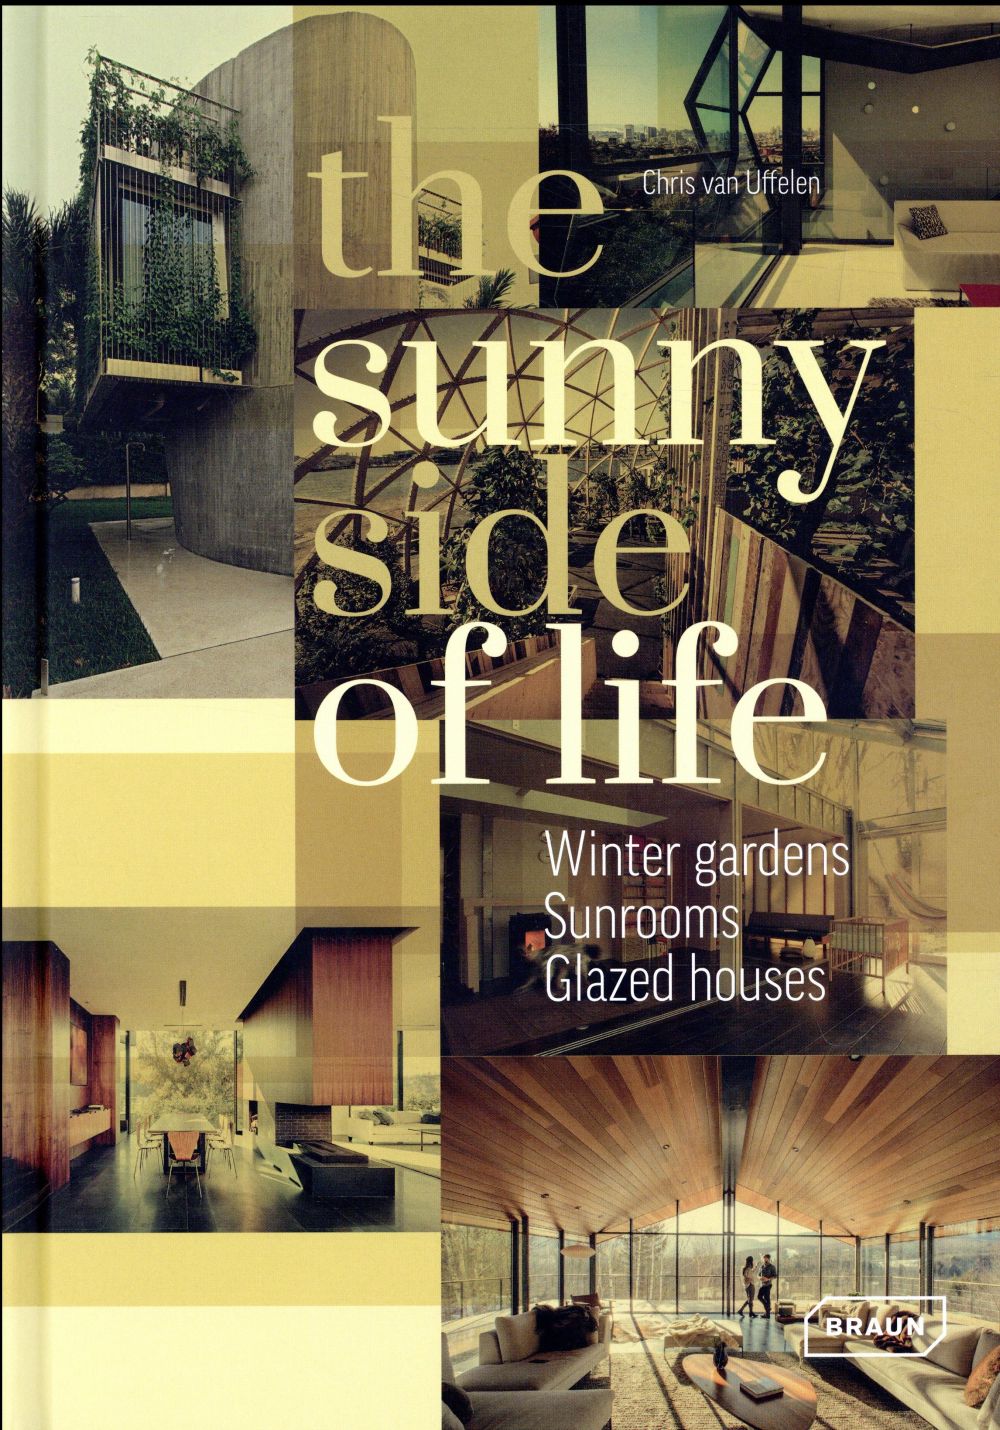 THE SUNNY SIDE OF LIFE - WINTER GARDENS, SUNROOMS, GREENHOUSES